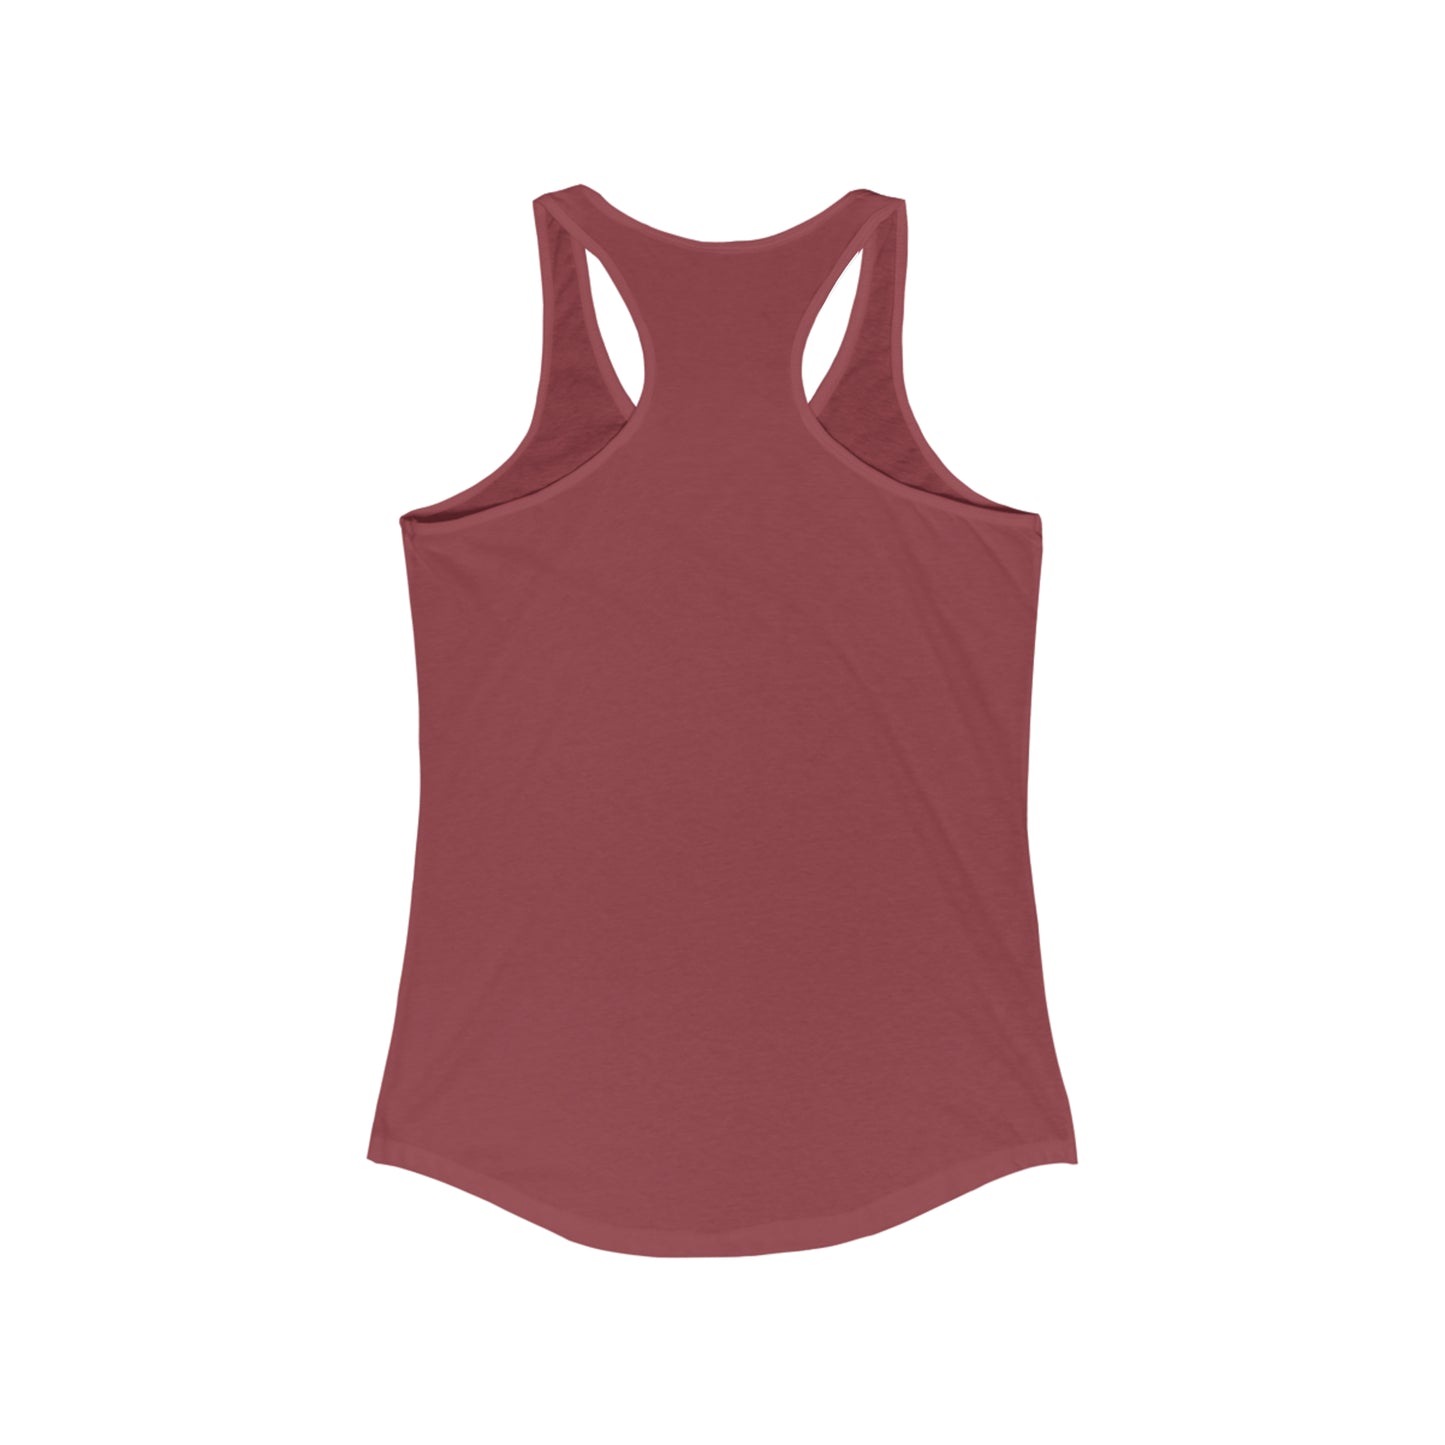 What Do You Blend? Racerback Tank